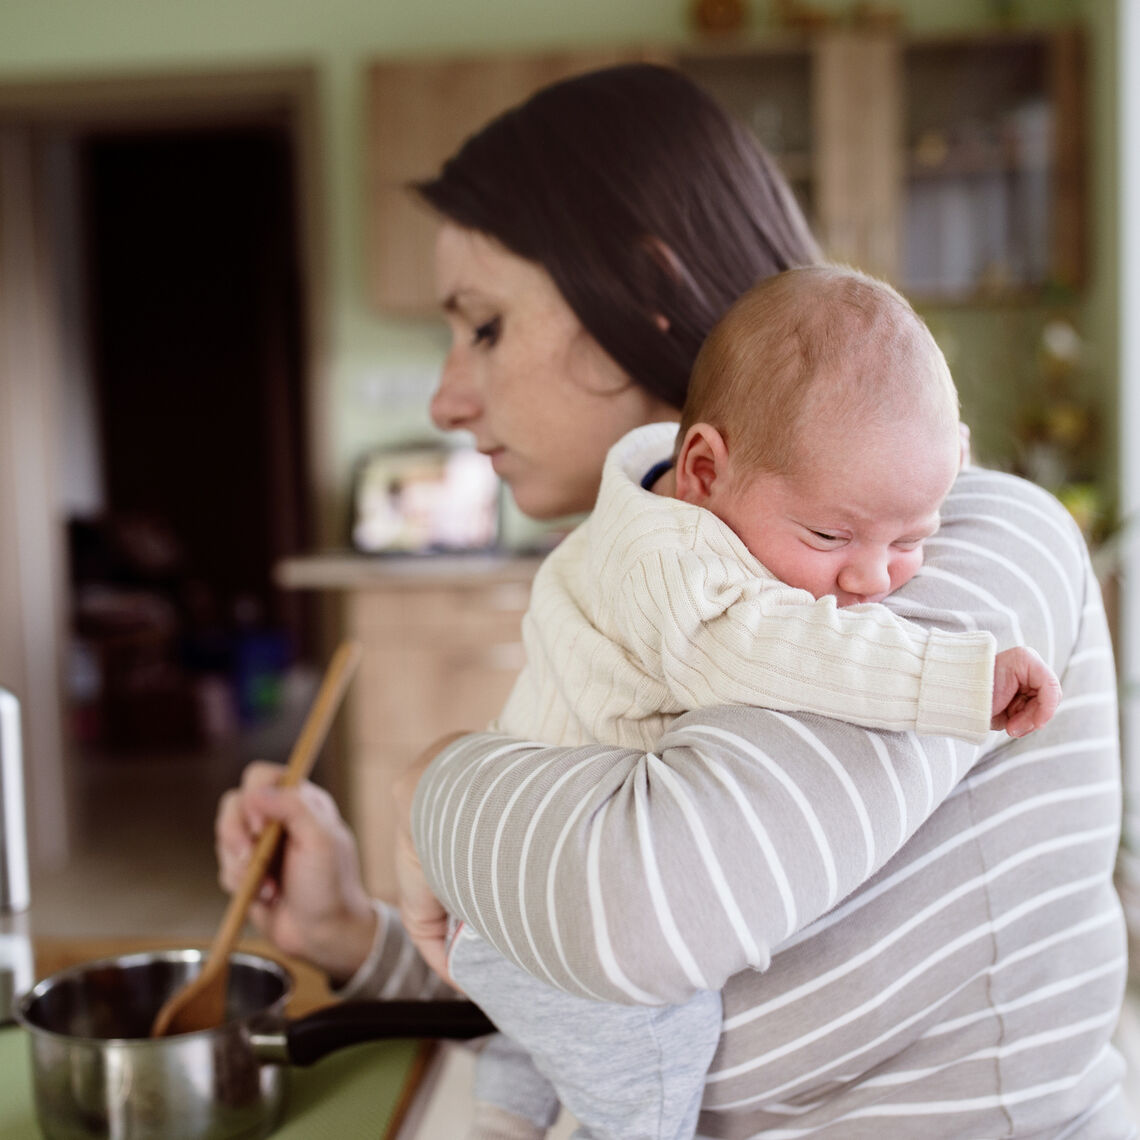 Beautiful young mother at home in the kitchen holding her newborn baby son, cooking, mixing something in pan (Beautiful young mother at home in the kitchen holding her newborn baby son, cooking, mixing something in pan.